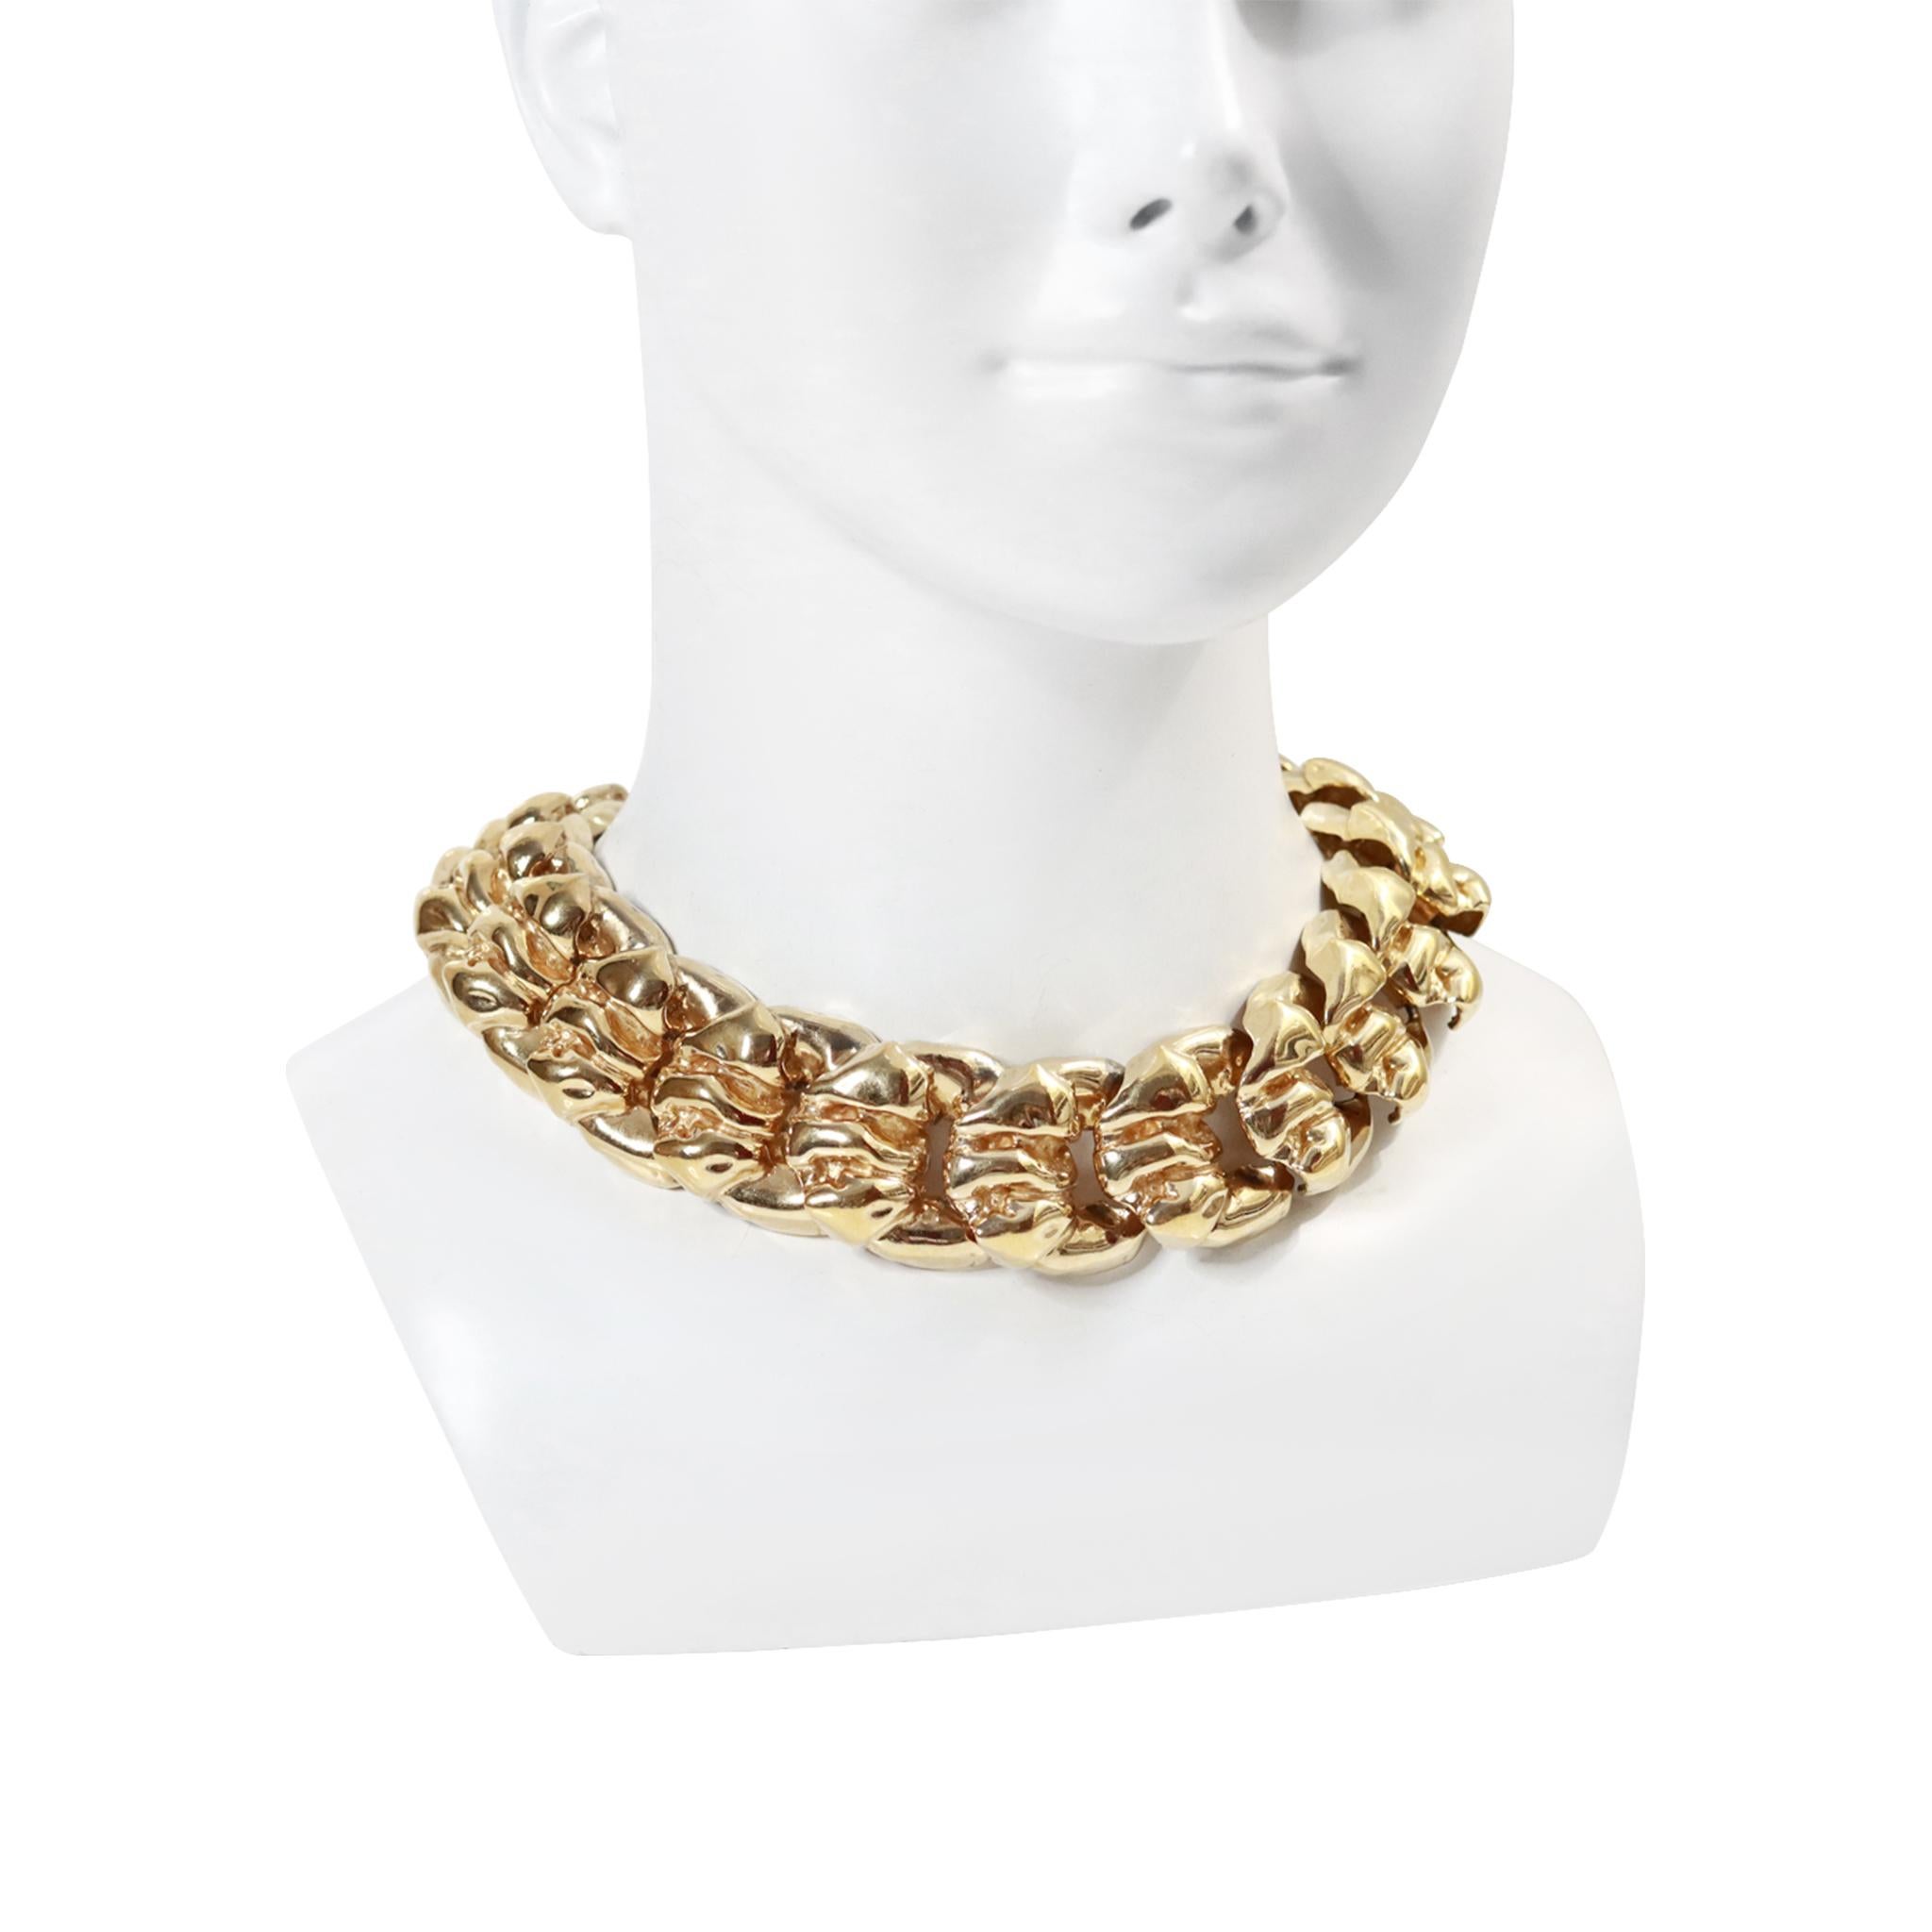 Vintage Ciner Chunky Linking Pieces Choker Necklace Circa 1980's For Sale 1